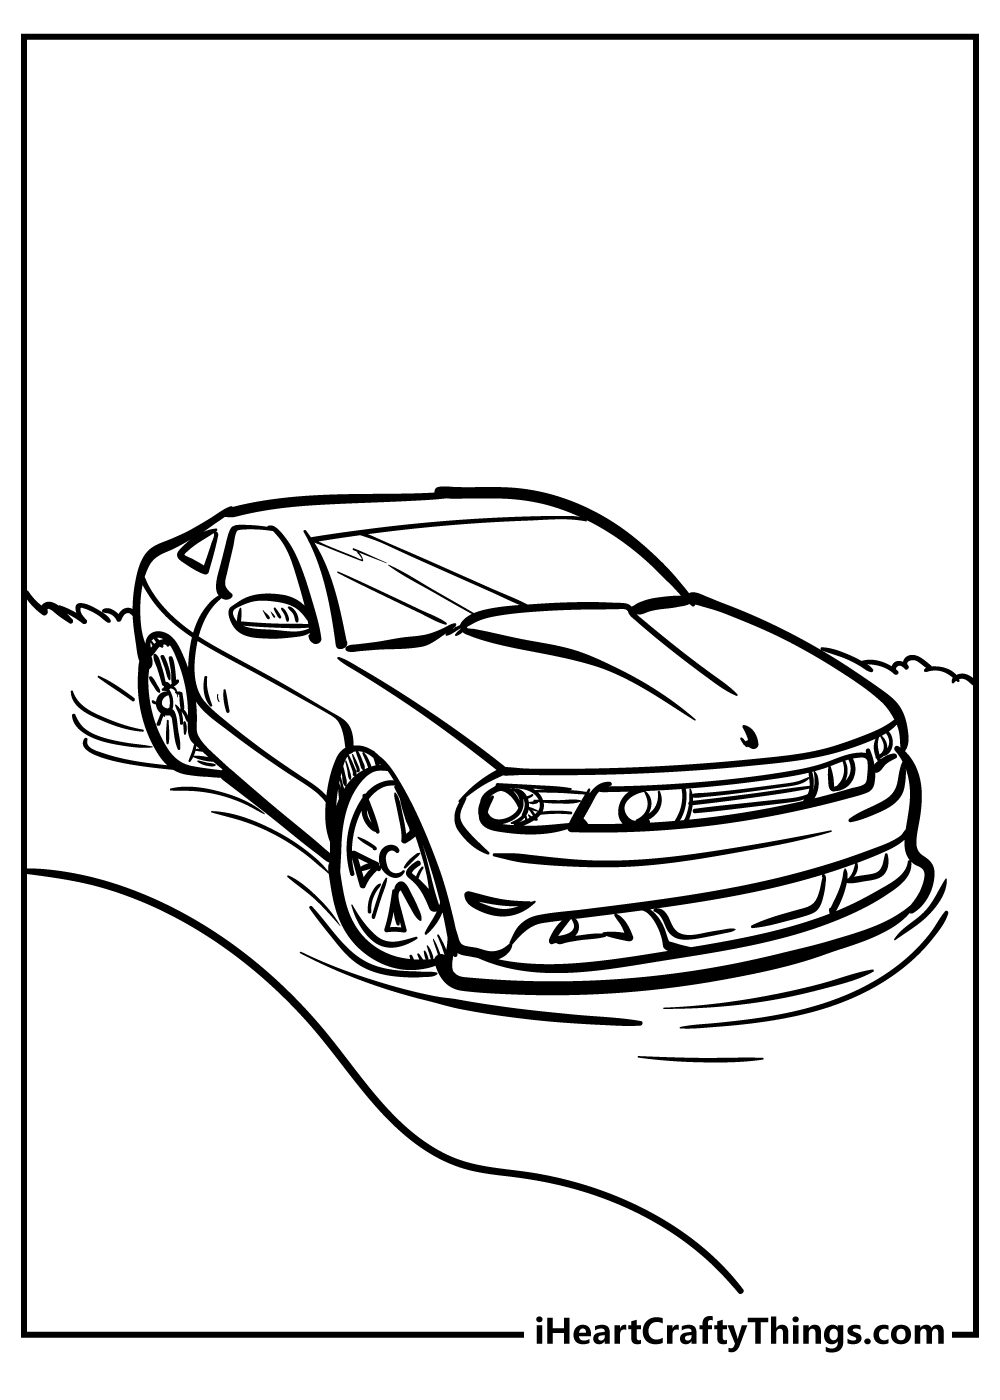 Car coloring pages free printable